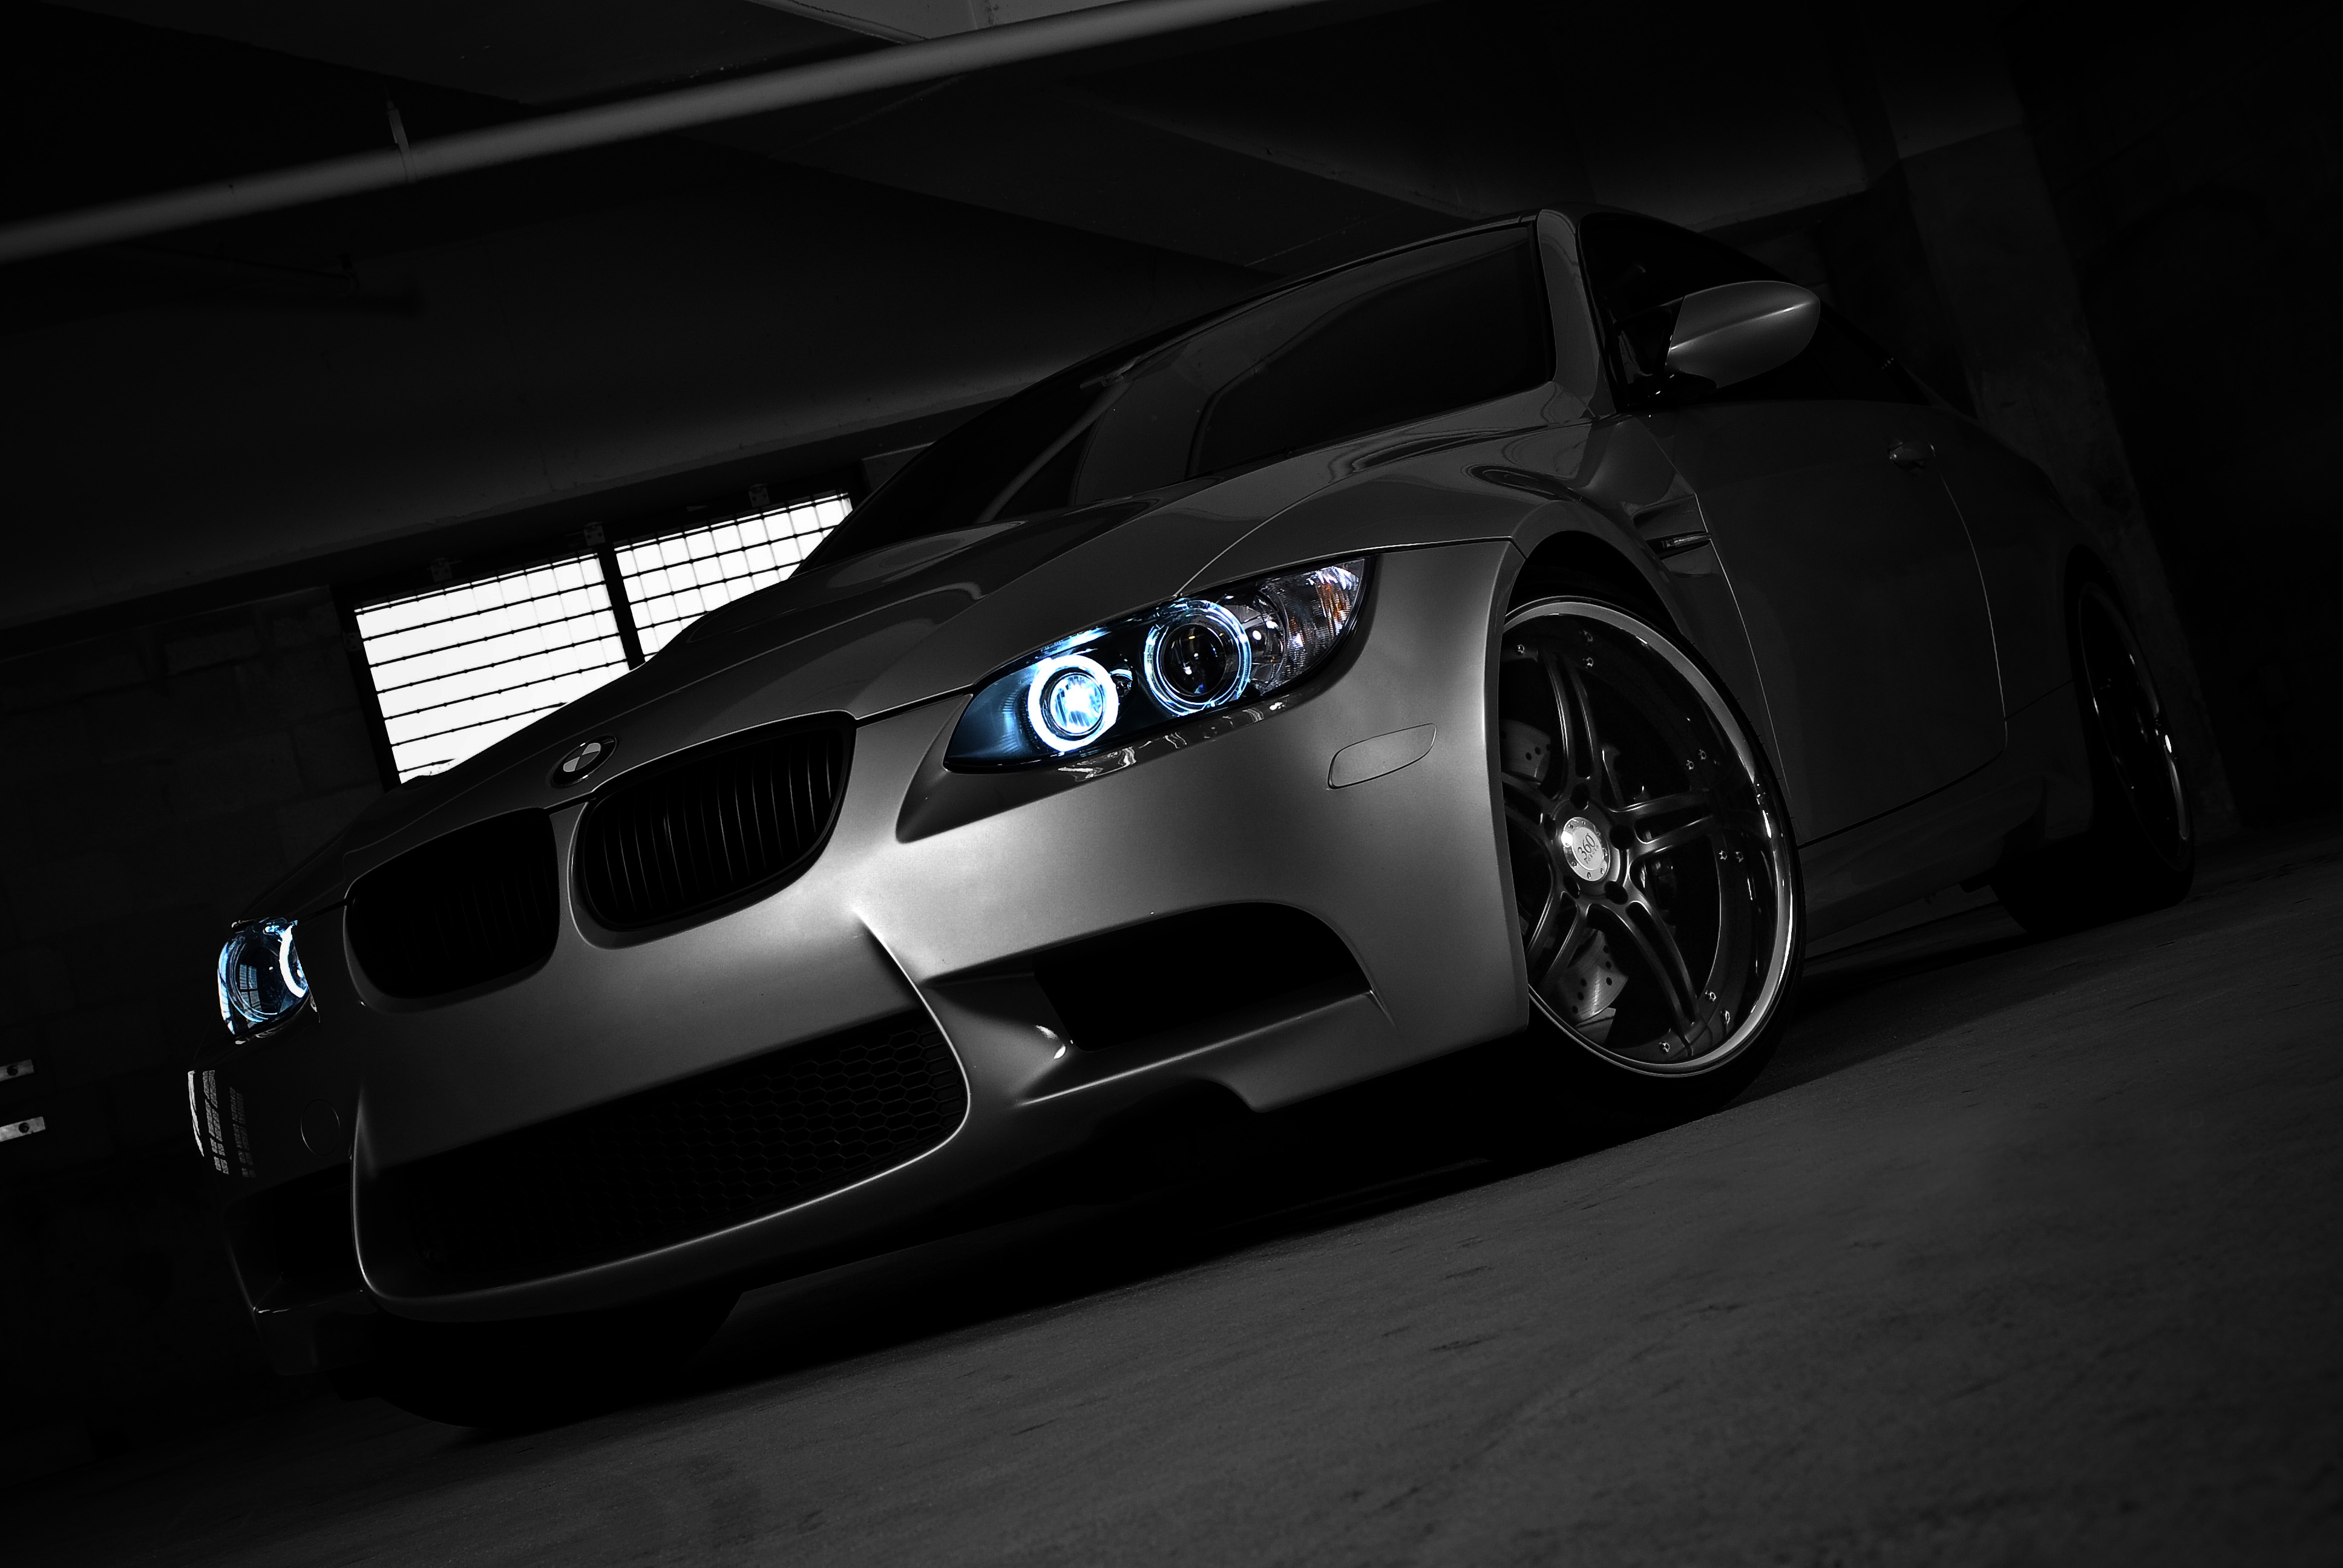 bmw cars wallpapers hd free download